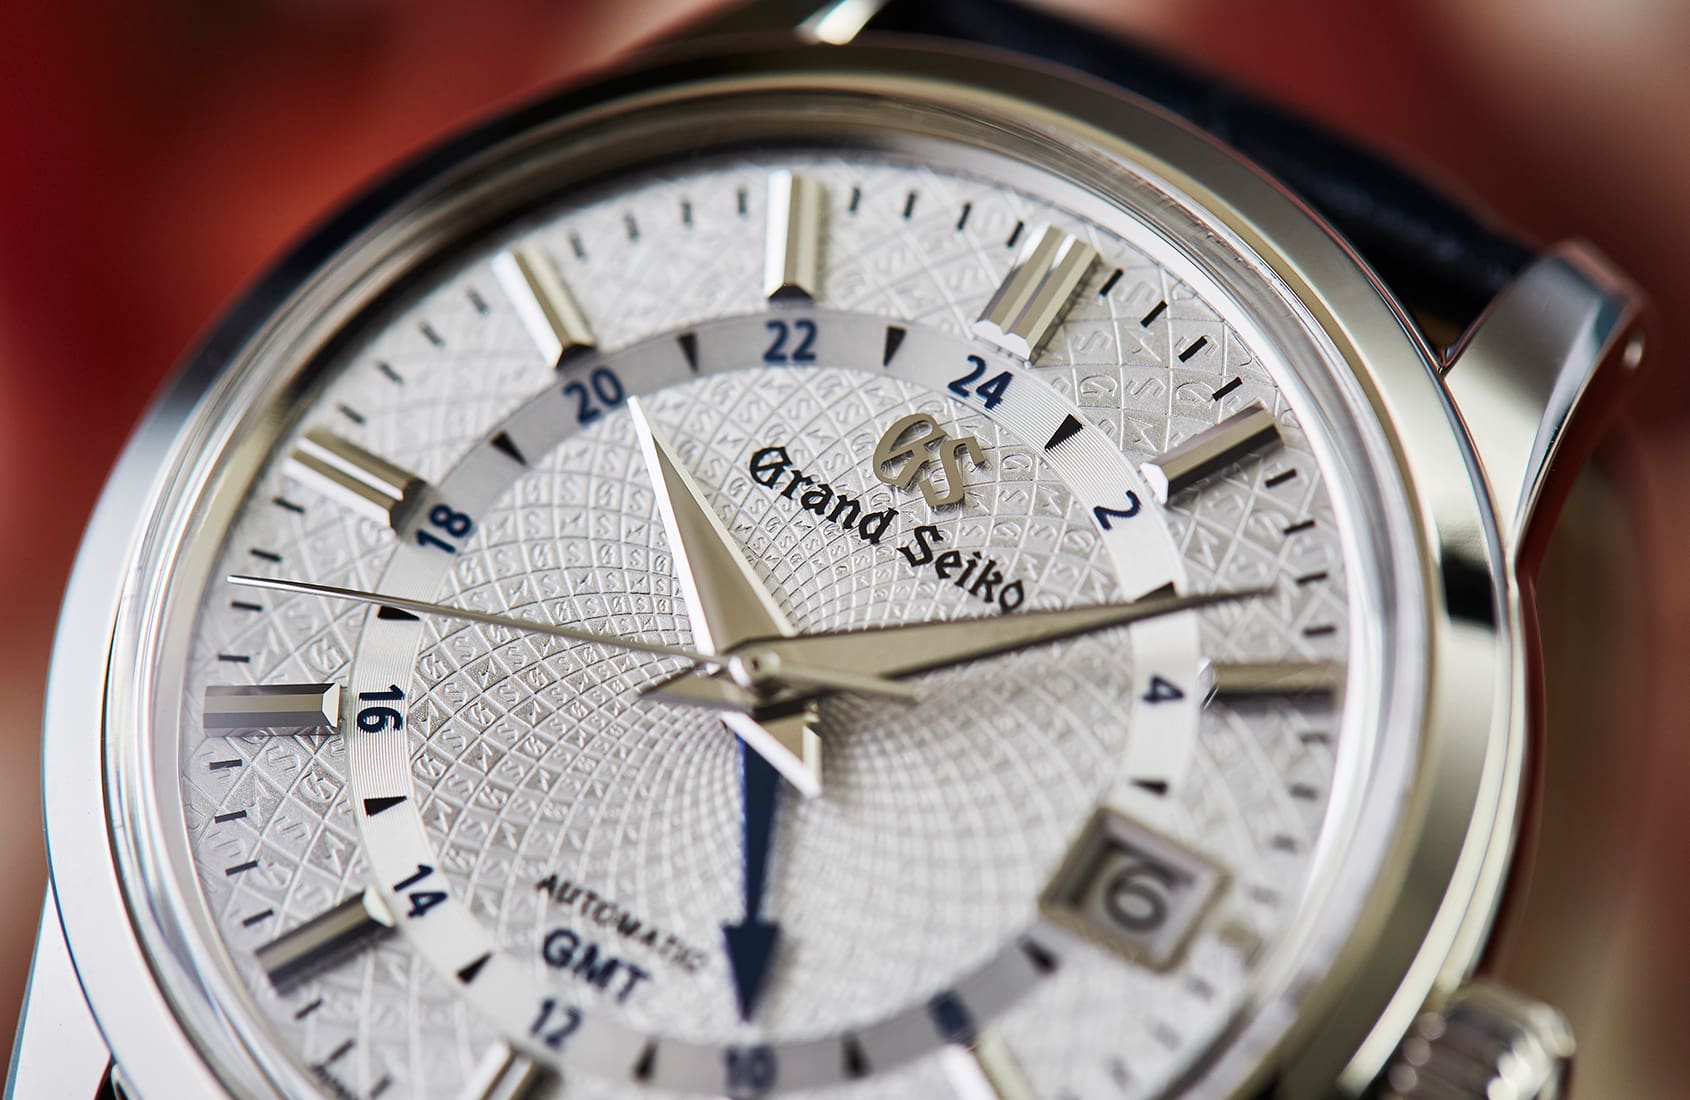 Galaxy fusionere arm HANDS-ON: Grand Seiko's dressy GMT – the SBGM235 - Time and Tide Watches